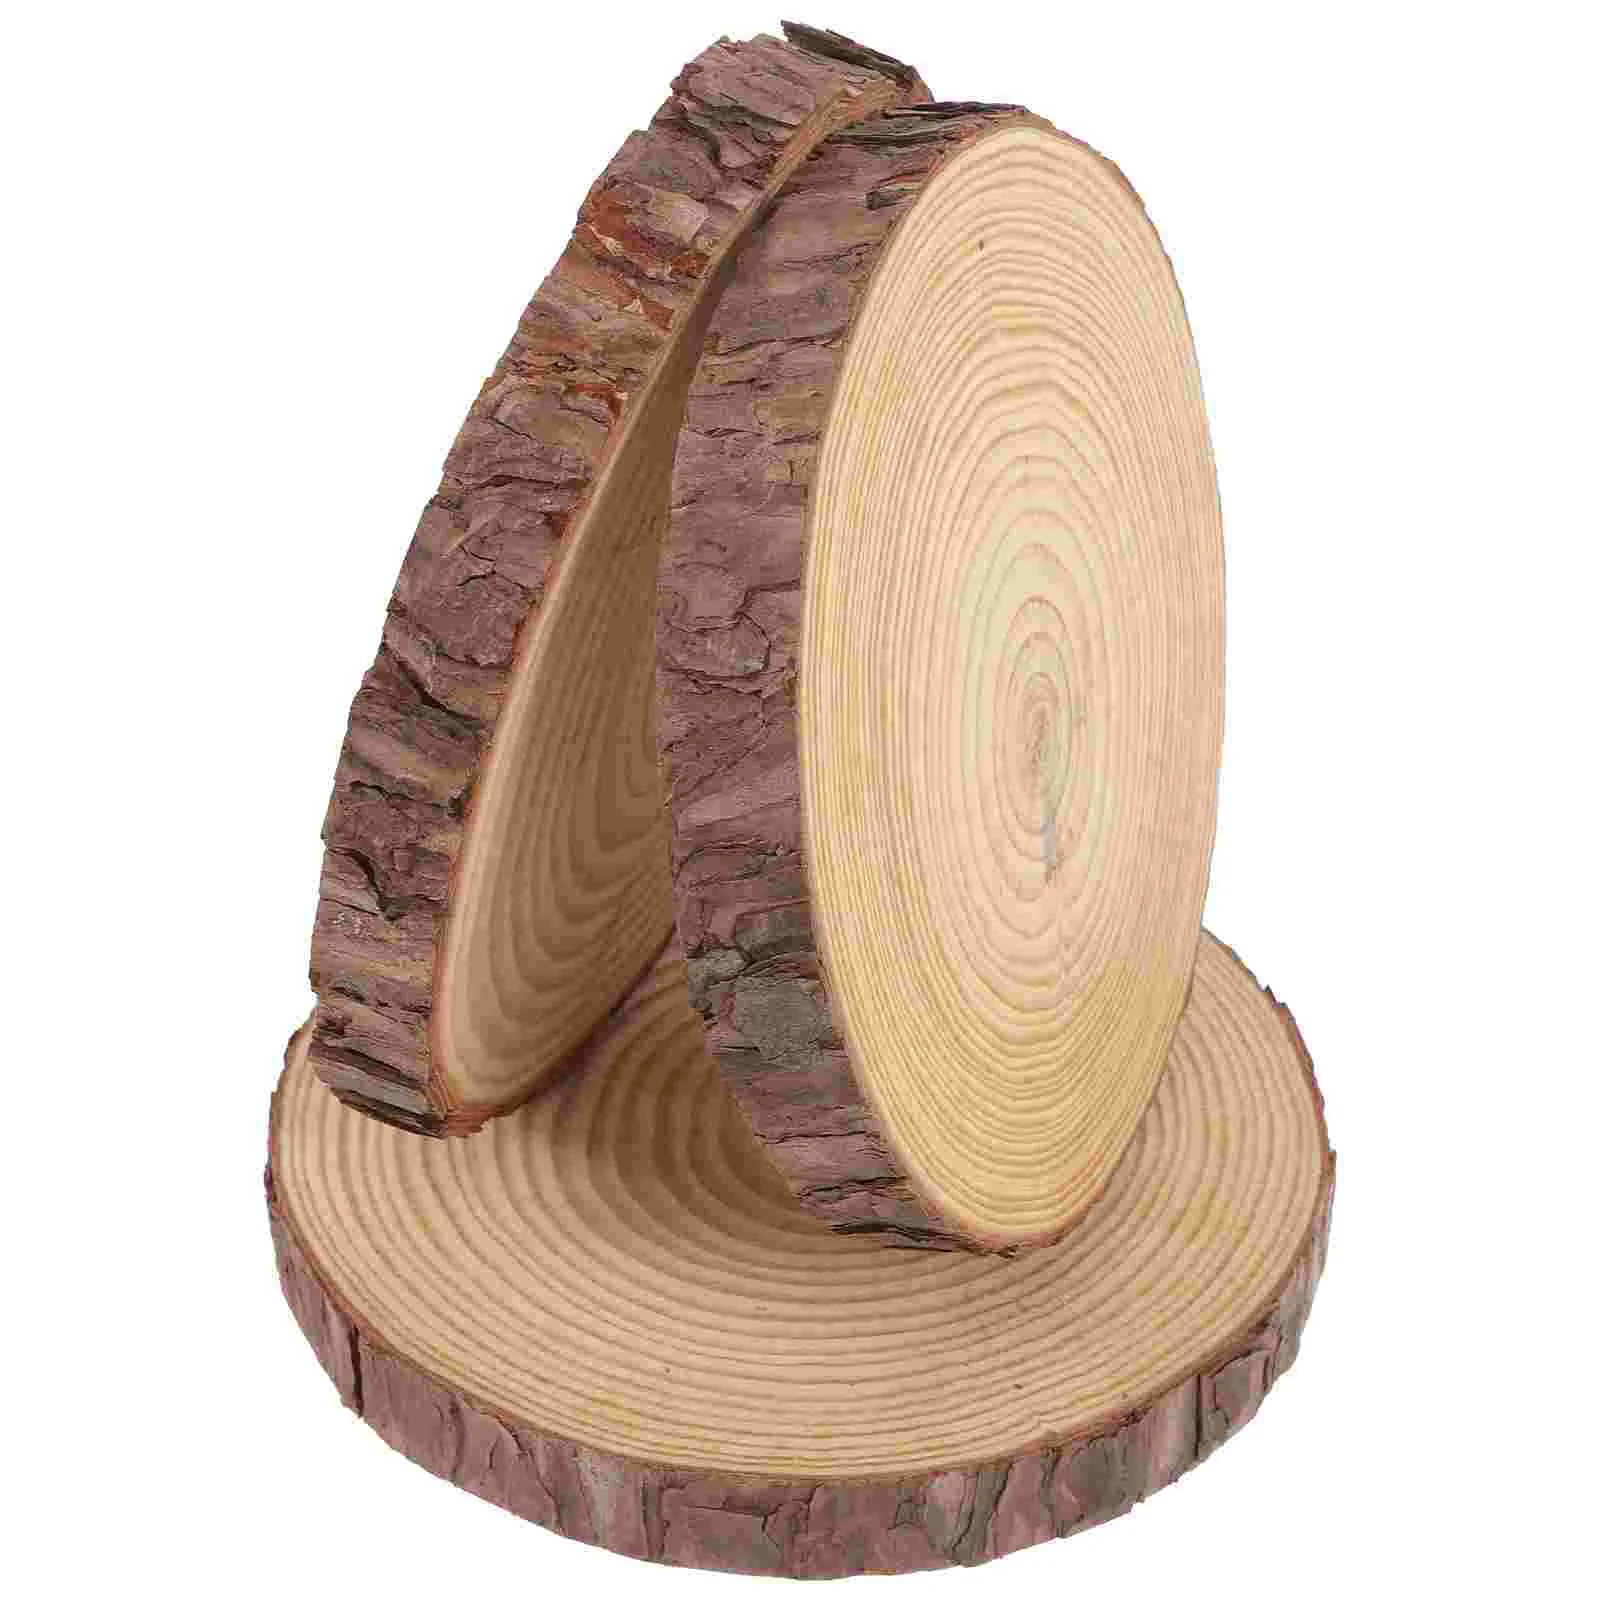 

Outdoor Wooden Stepping Stones Garden Log Paver Decor Patio and Decorative Walkway Kit